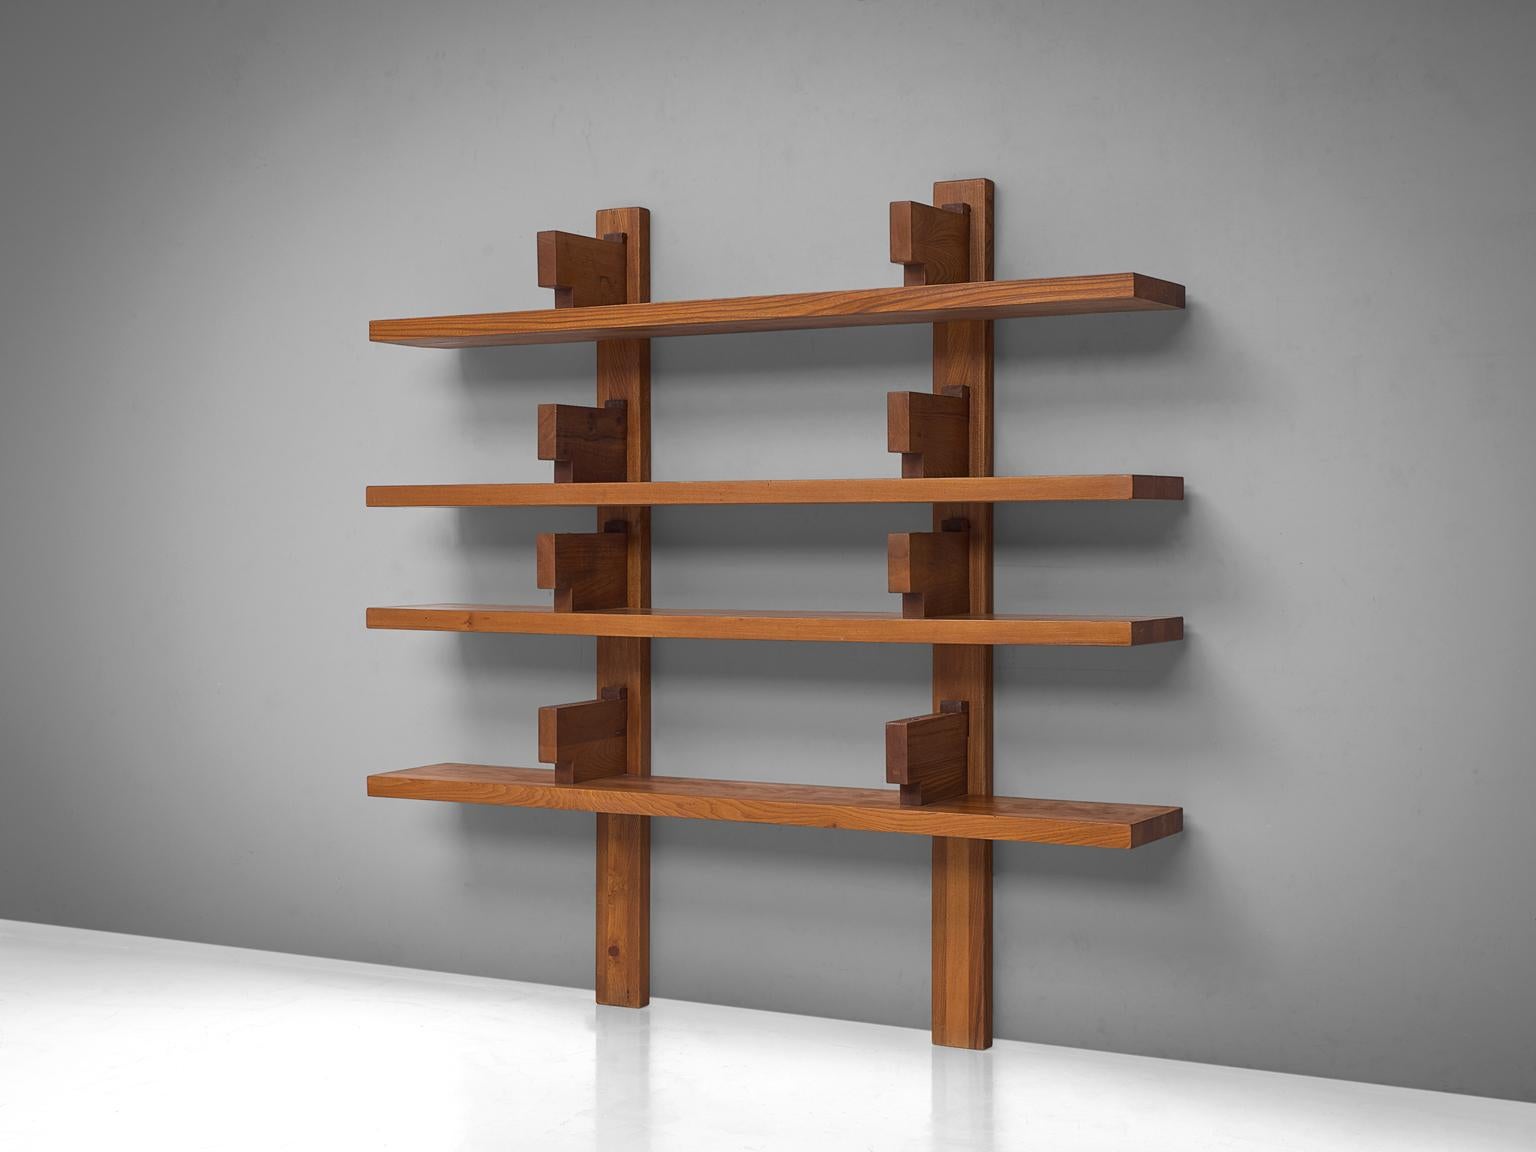 Pierre Chapo, Bibliothèque, model no. B17, elm, France, 1967.

The shelving system was created in 1967 were is was presented at the Salon des Arts Ménagers. This robust and solid bookcase consist of four elm shelves that rest under brackets.